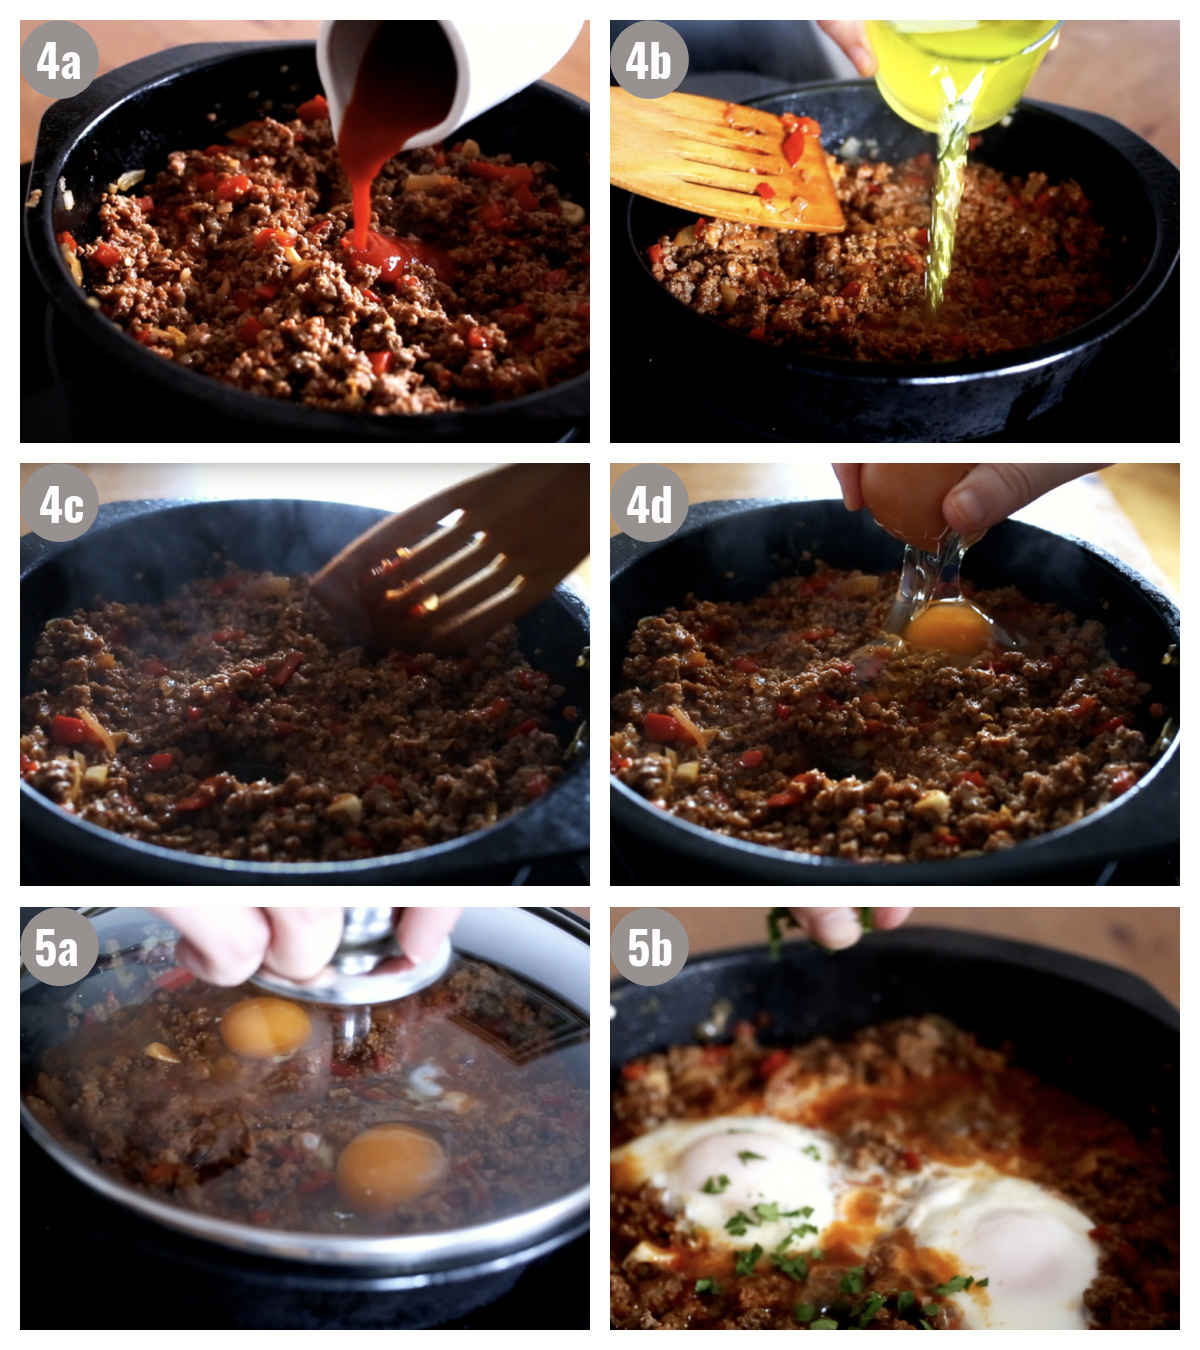 Six photographs of different ingredients cooked in a black pan (ground beef, tomato sauce, broth, eggs). 